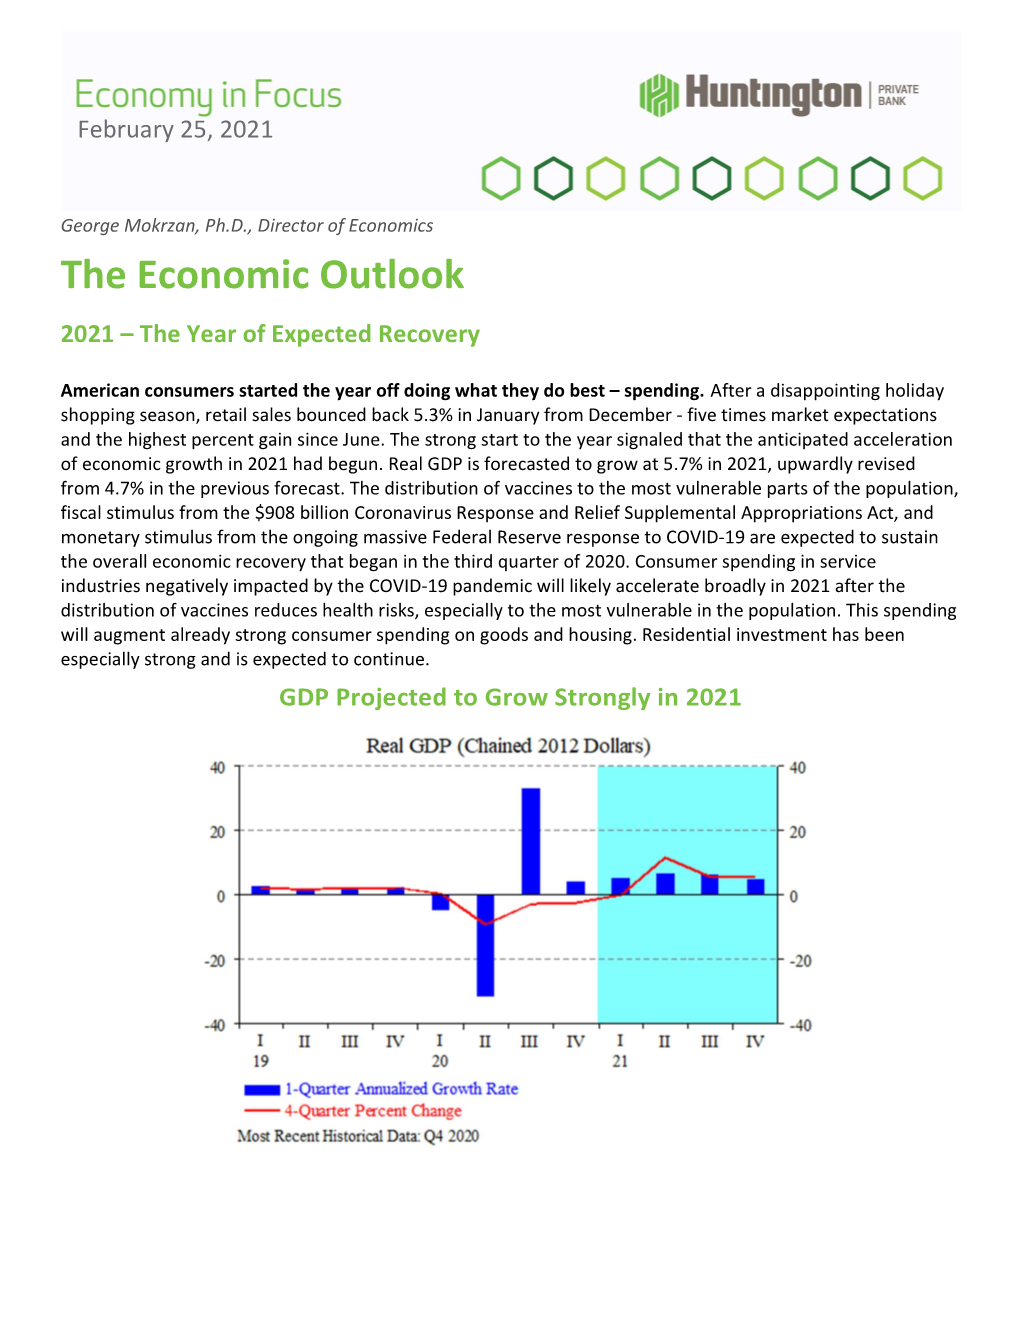 The Economic Outlook 2021 – the Year of Expected Recovery